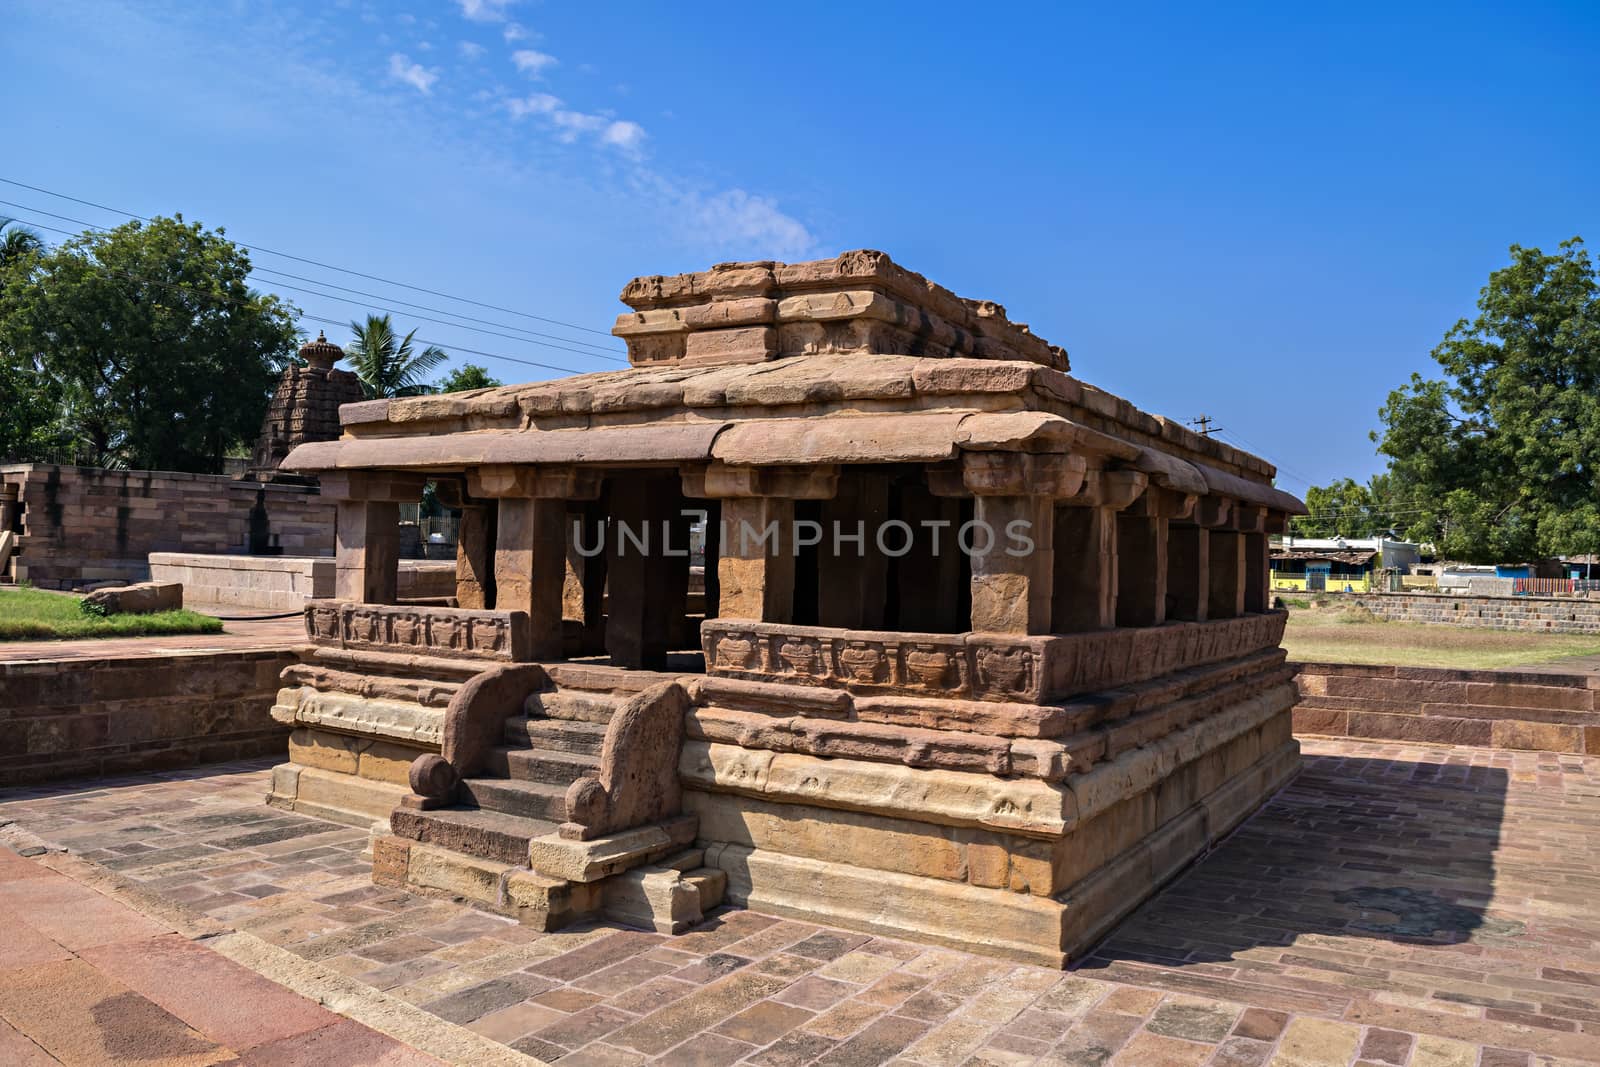 Ancient 8th century carved stone temple with beautiful blue sky at Aihole, Karnataka, India. The exquisite sculpted monument has been excavated.